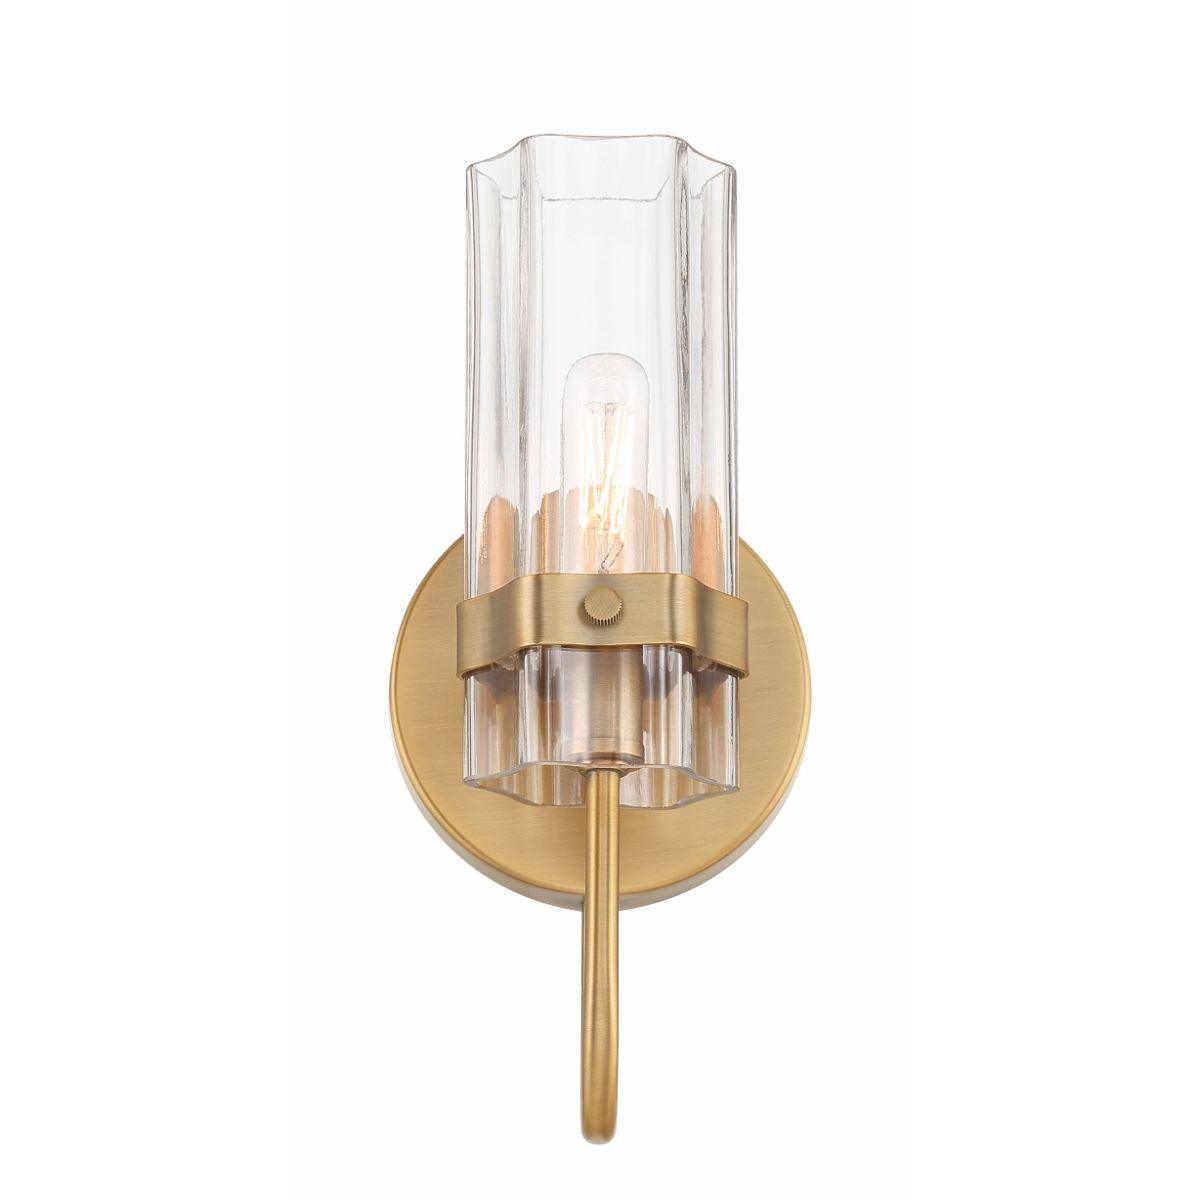 Brook 11 in. Bath Sconce